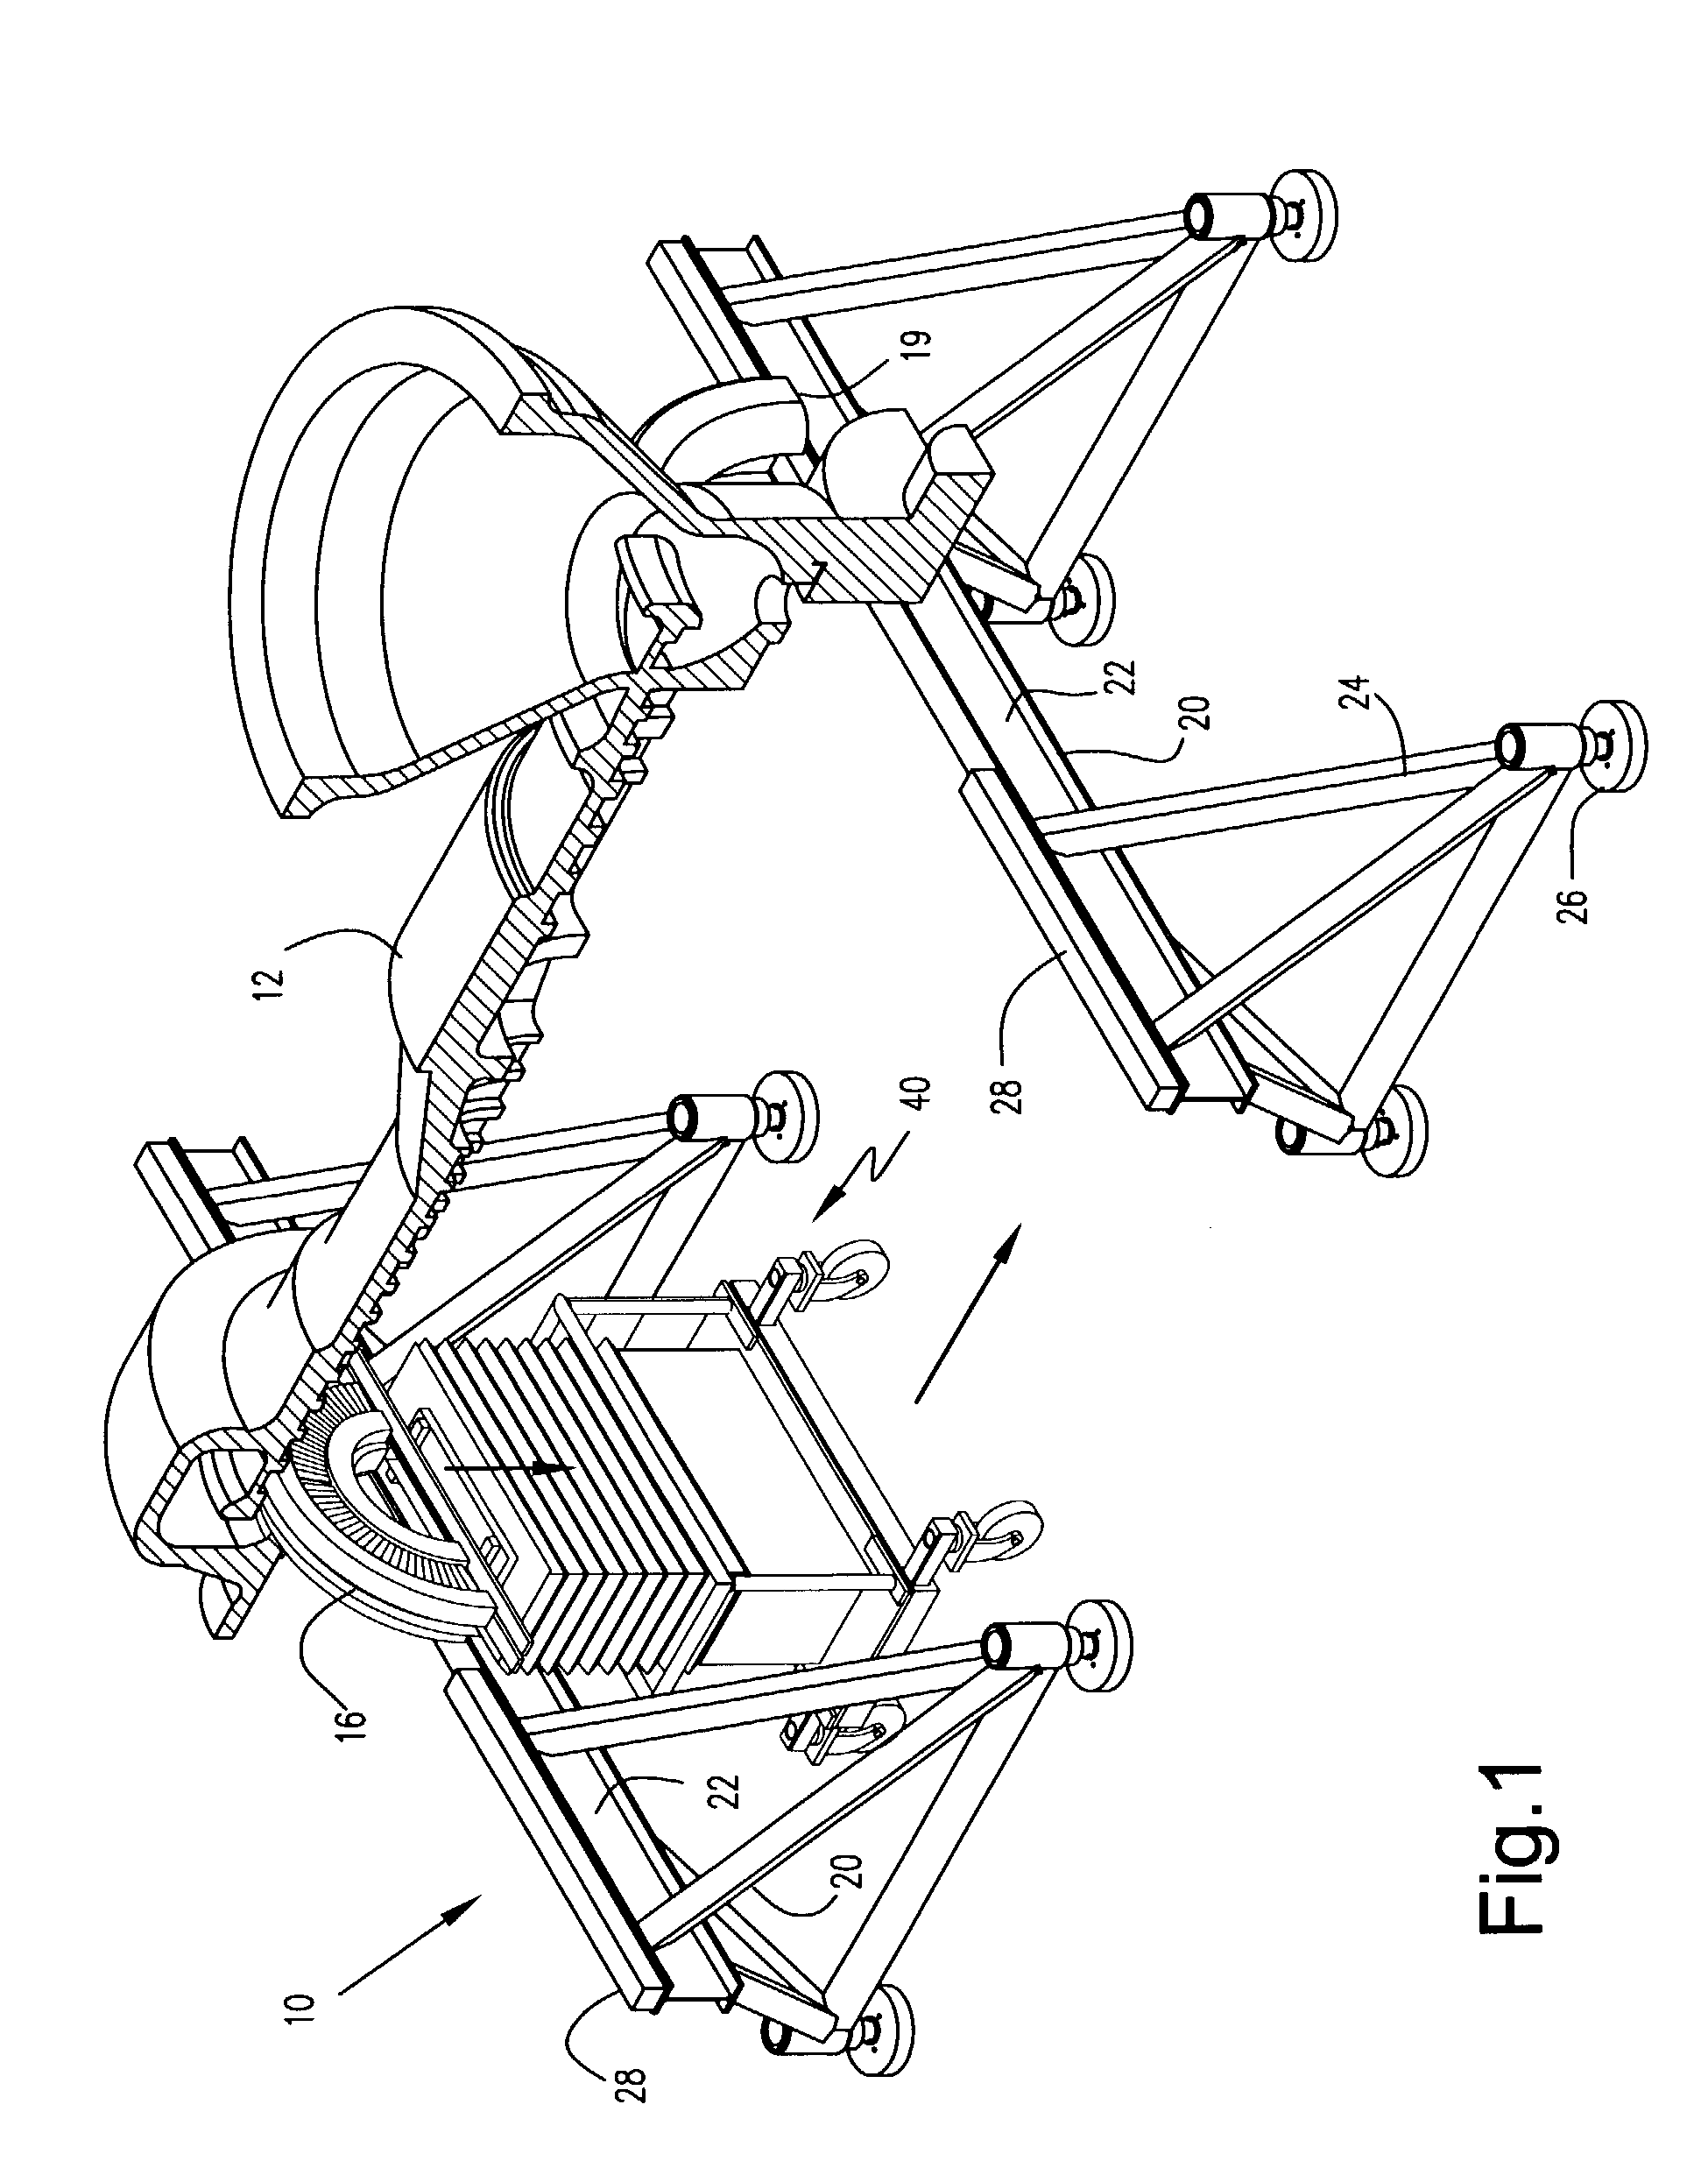 Apparatus and methods for removing and installing an upper diaphragm half relative to an upper shell of a turbine